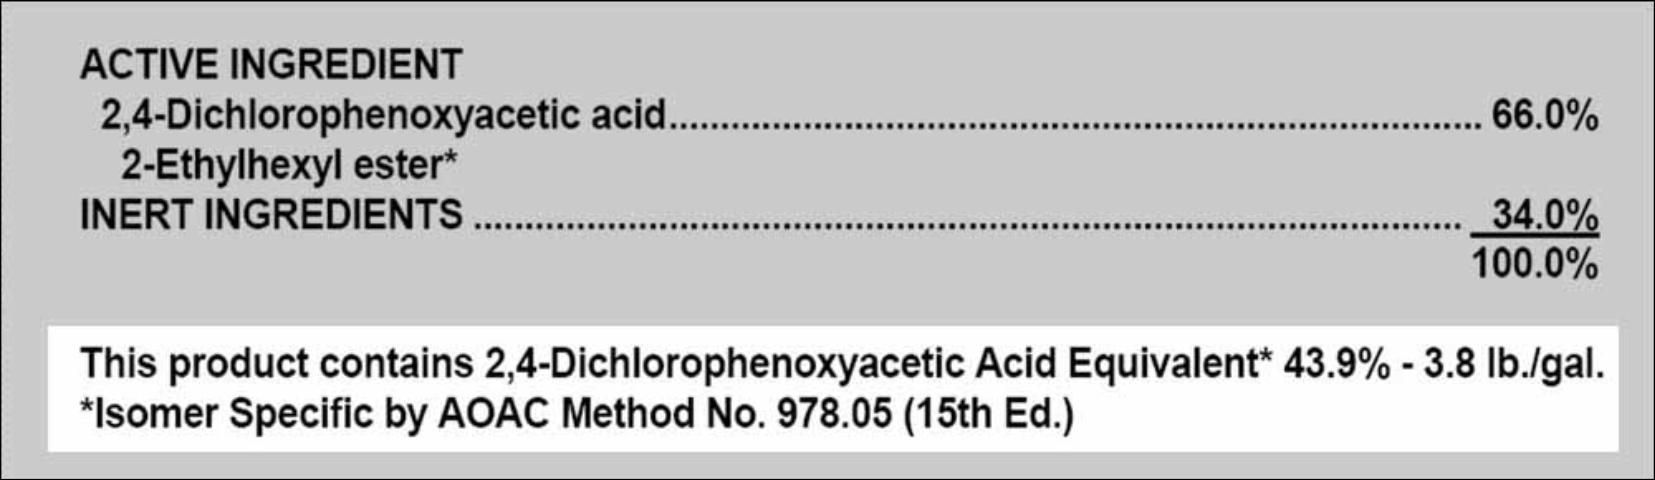 Figure 4. Statement of the acid content.